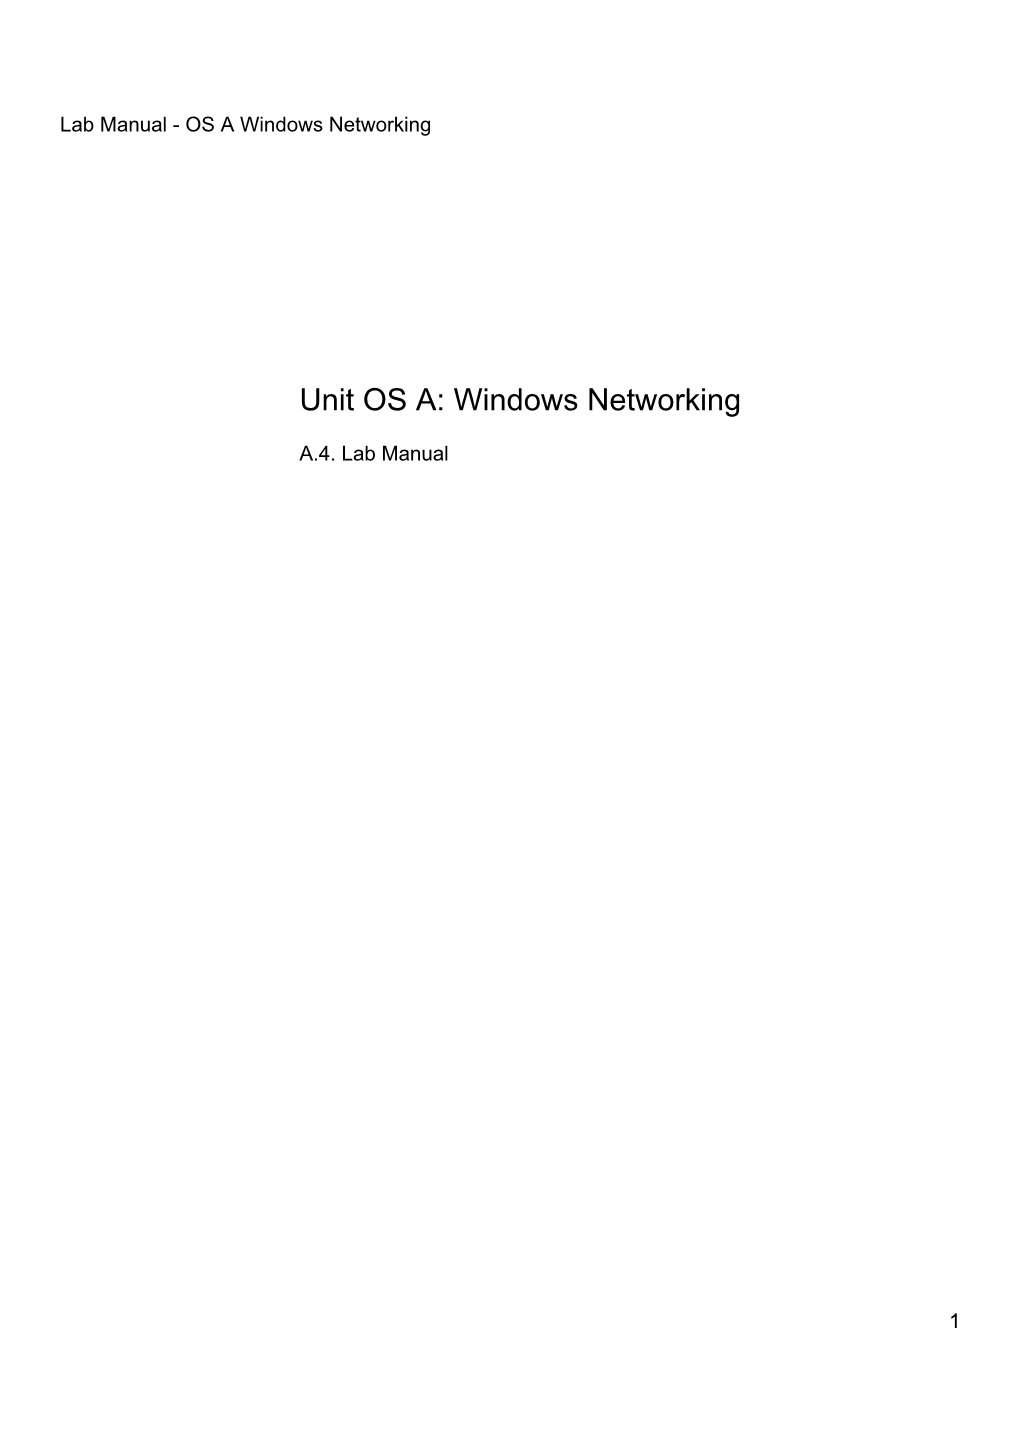 Unit OS A: Windows Networking